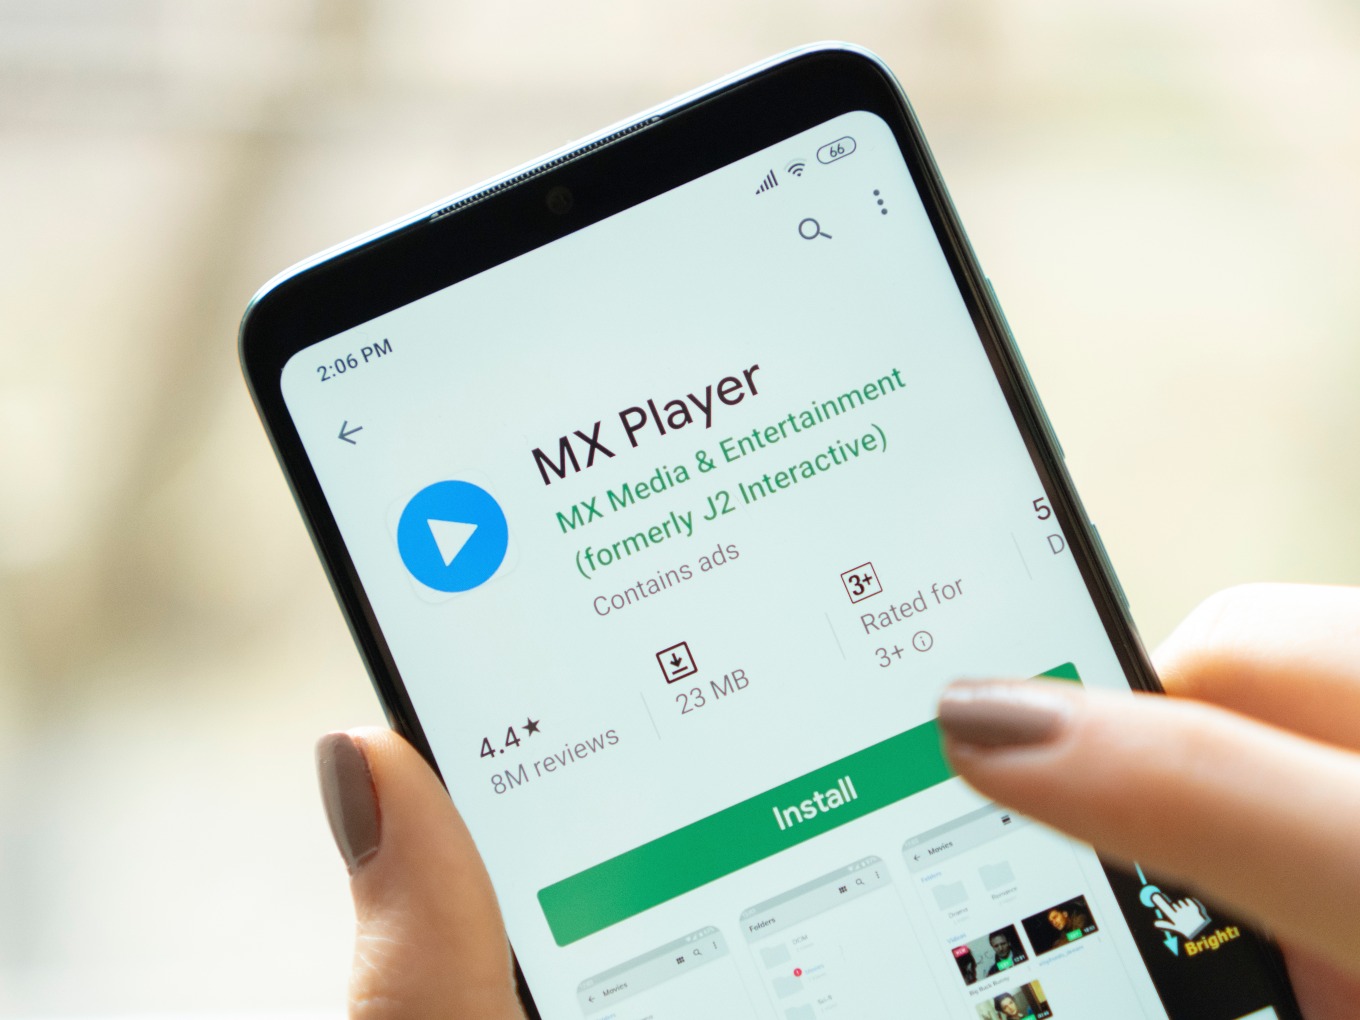 MX Player Tops India’s Video Streaming App For Time Spent